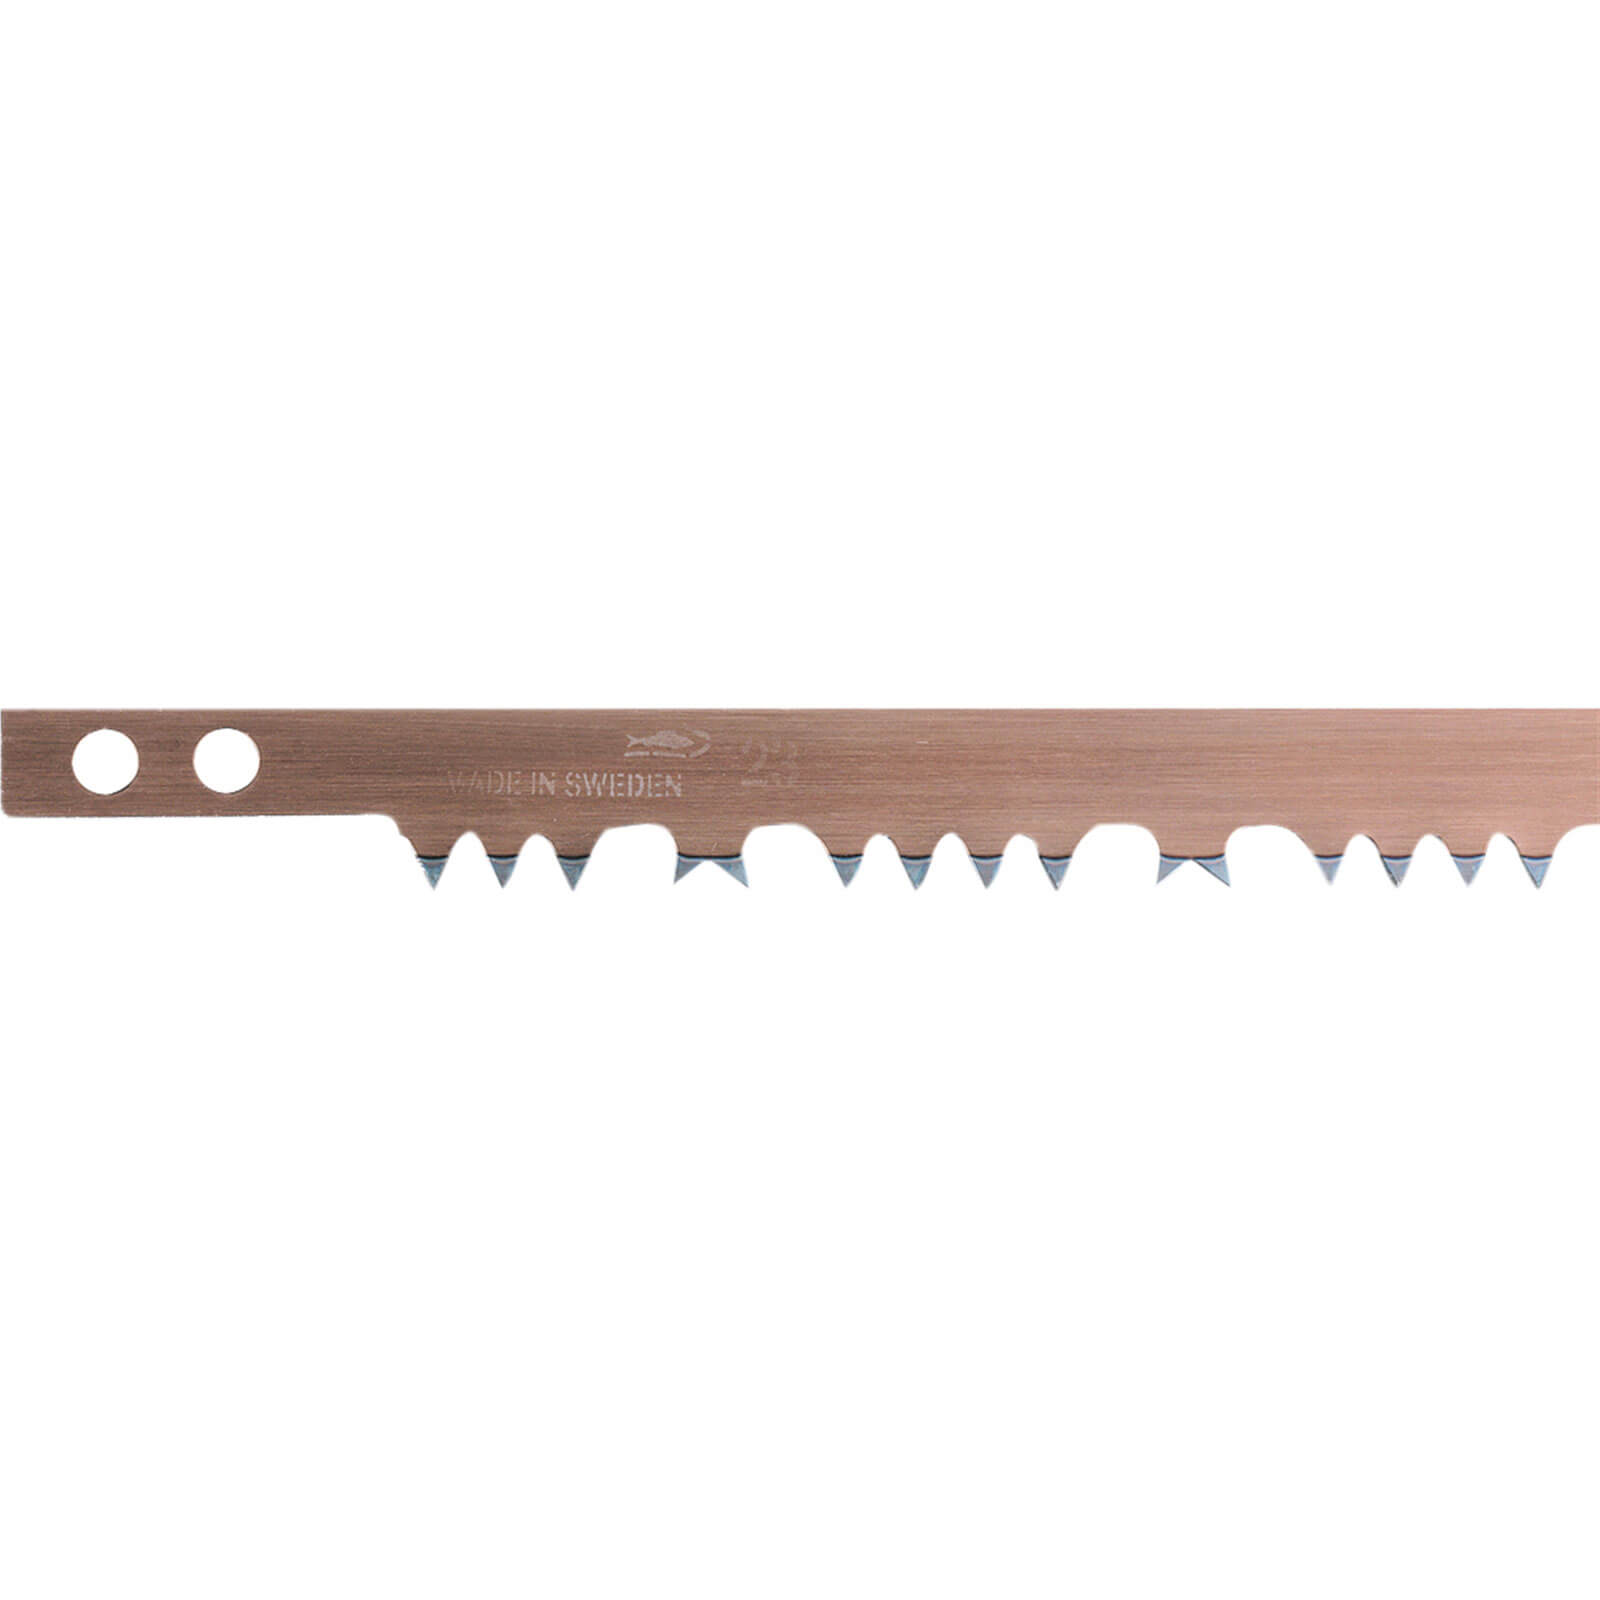 Bahco Raker Tooth Hard Point Bowsaw Blade 21" / 530mm For Green Wood